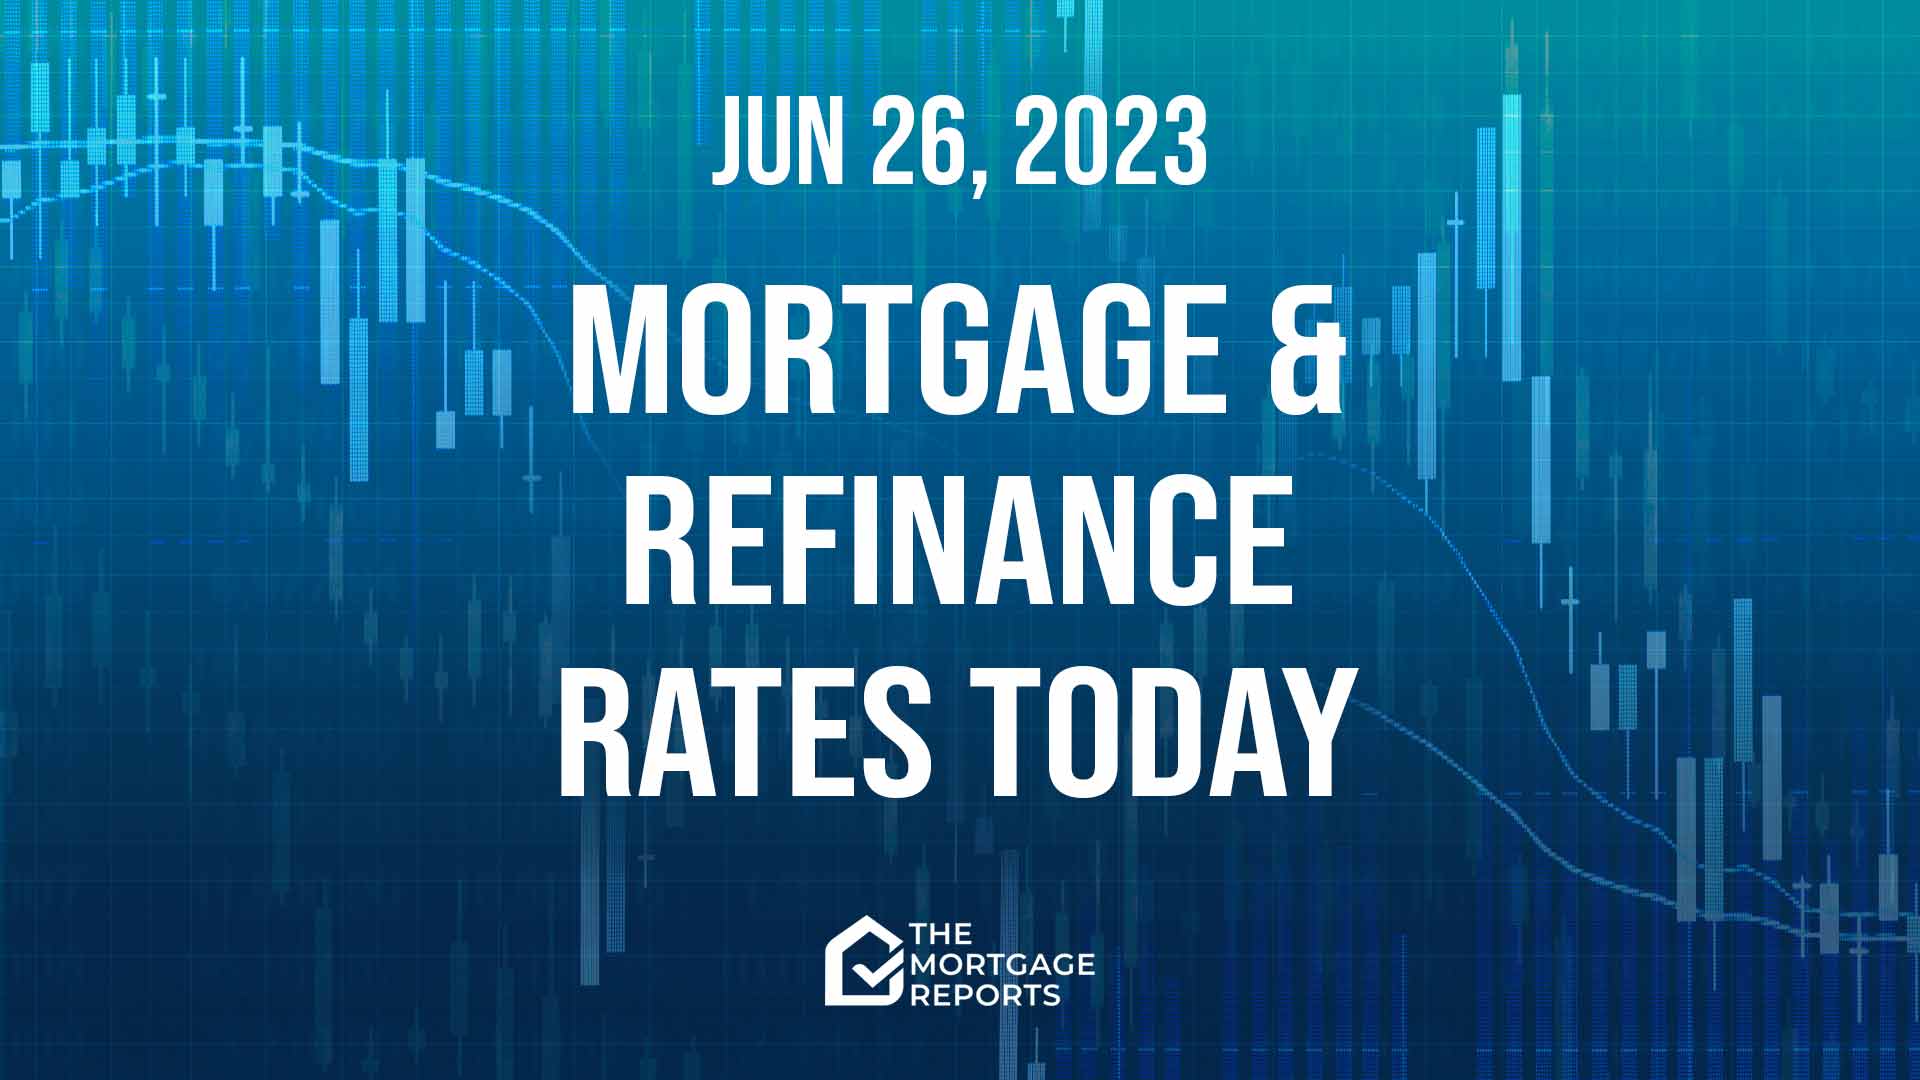 Mortgage and refinance rates today, Jun. 26, 2023